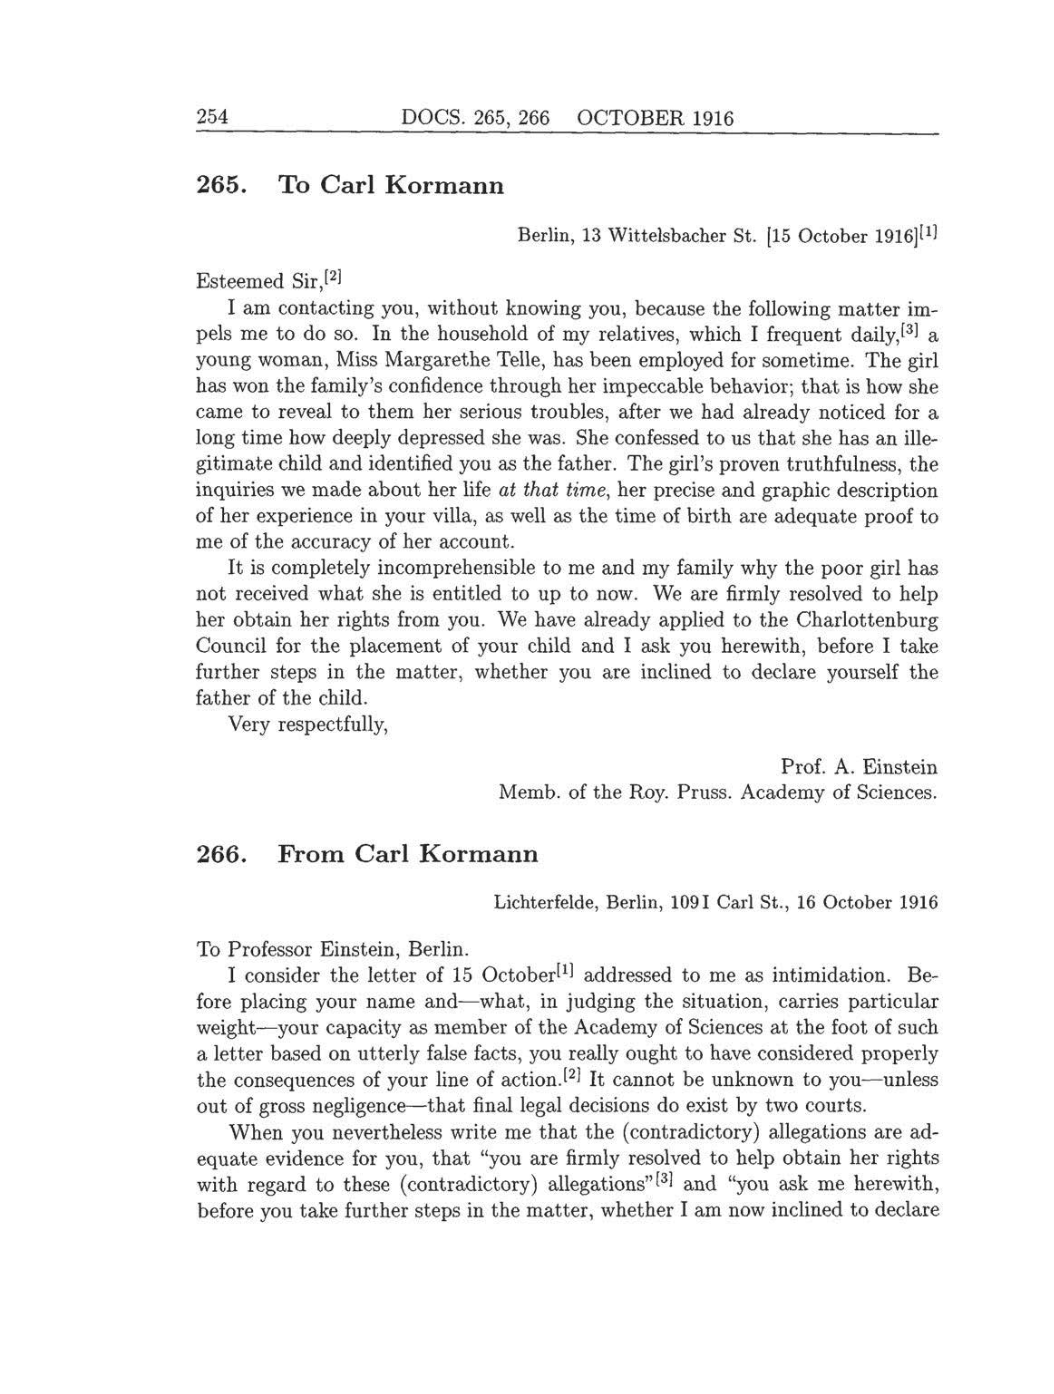 Volume 8: The Berlin Years: Correspondence, 1914-1918 (English translation supplement) page 254